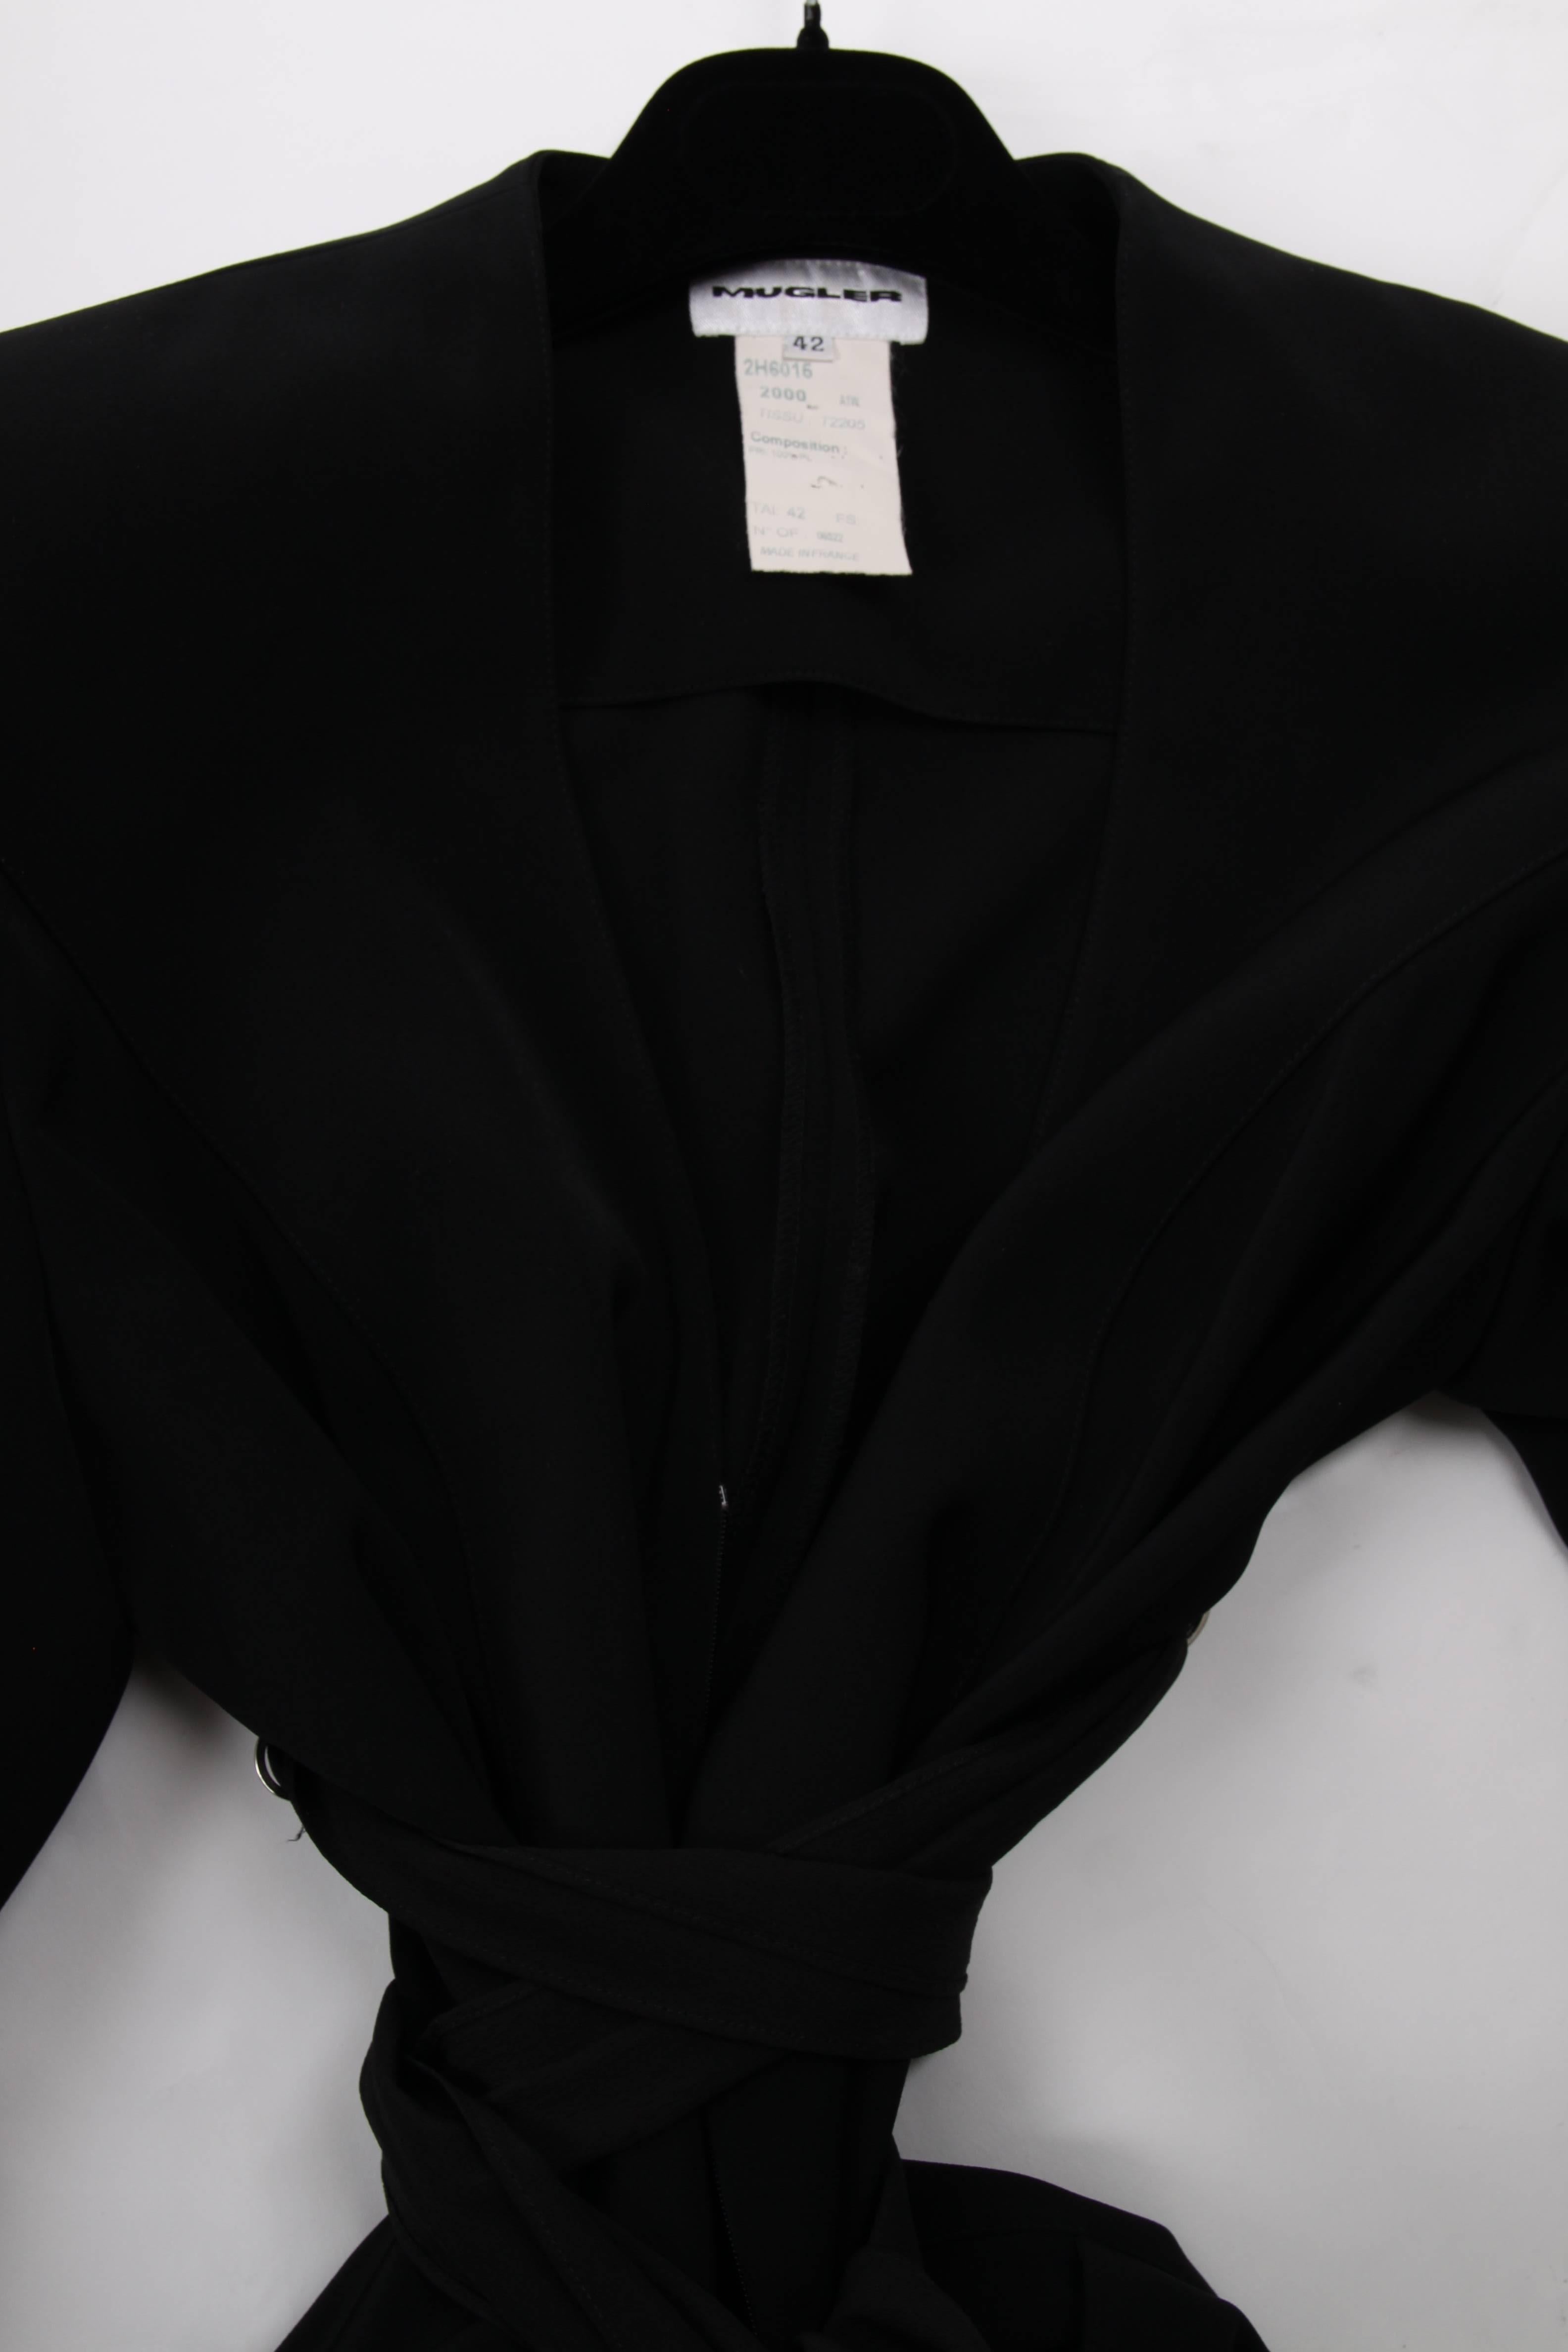 Vintage!! This is a masterpiece! A jumpsuit designed by Thierry Mugler, wonderful!

A deep V-neck, front closure with a zipper, long sleeves with cuffs and a push button. Padding in the shoulders, pockets on the hips and a bow detail in the waist.